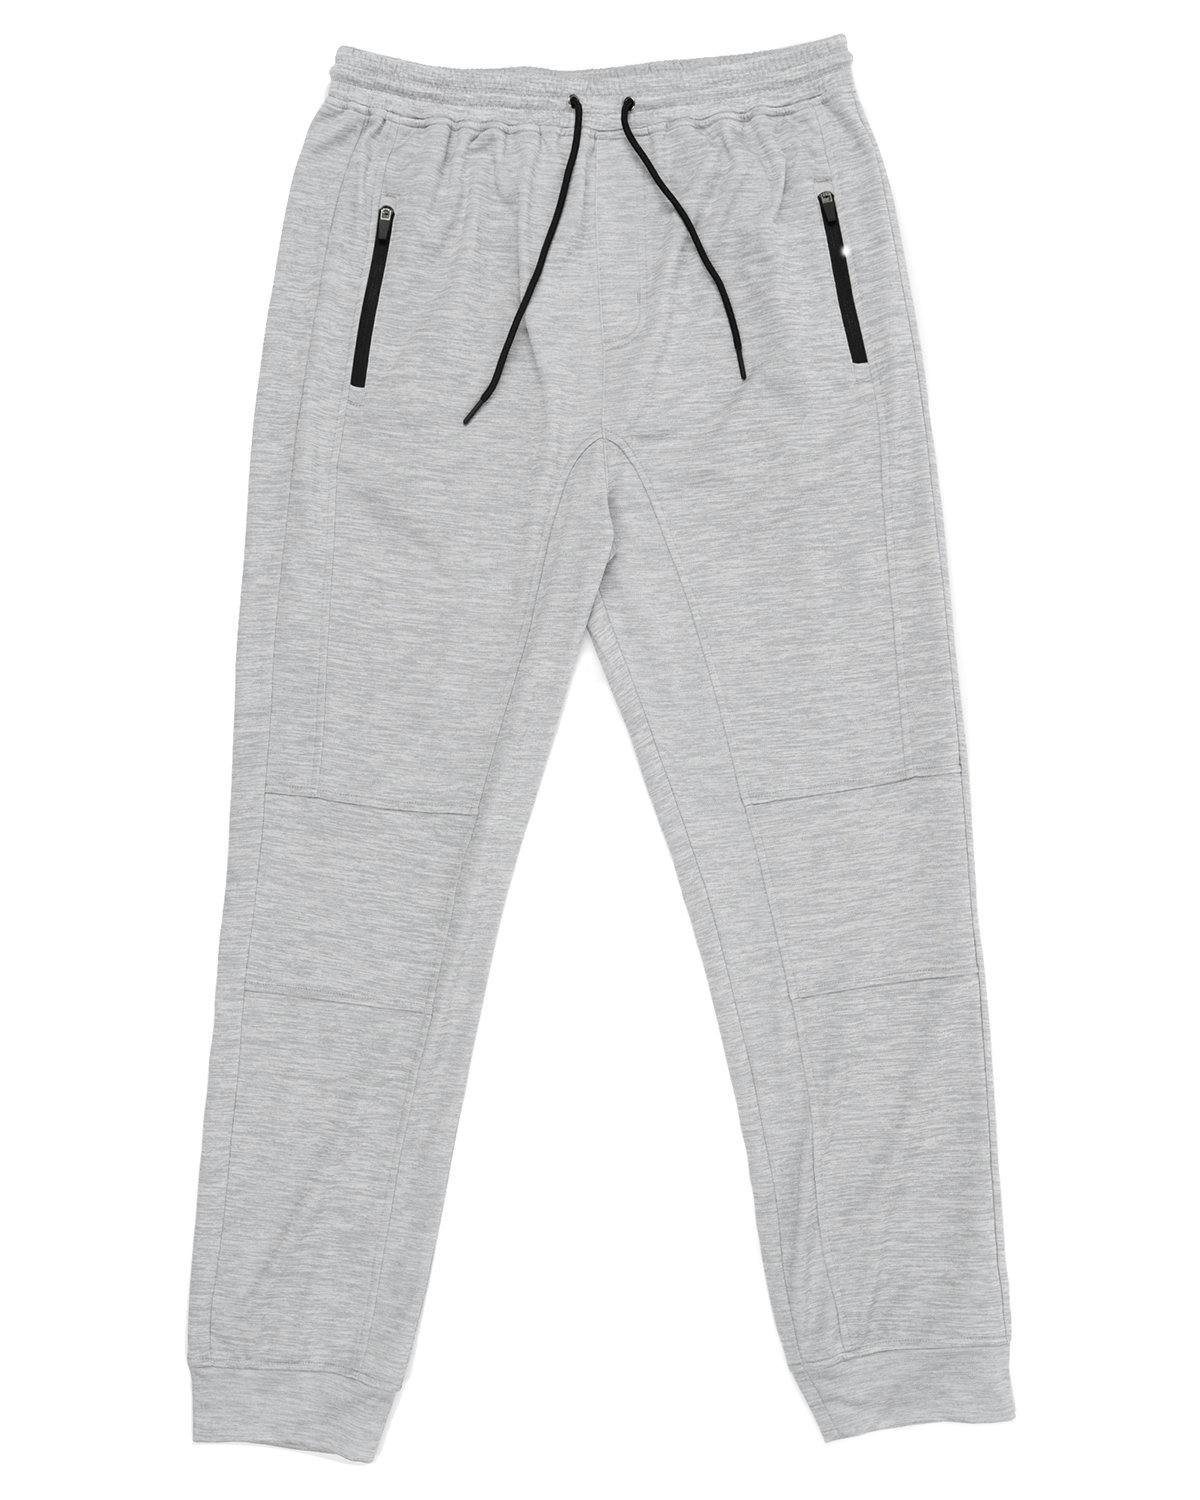 Image for Men's Go Anywhere Performance Jogger Pant